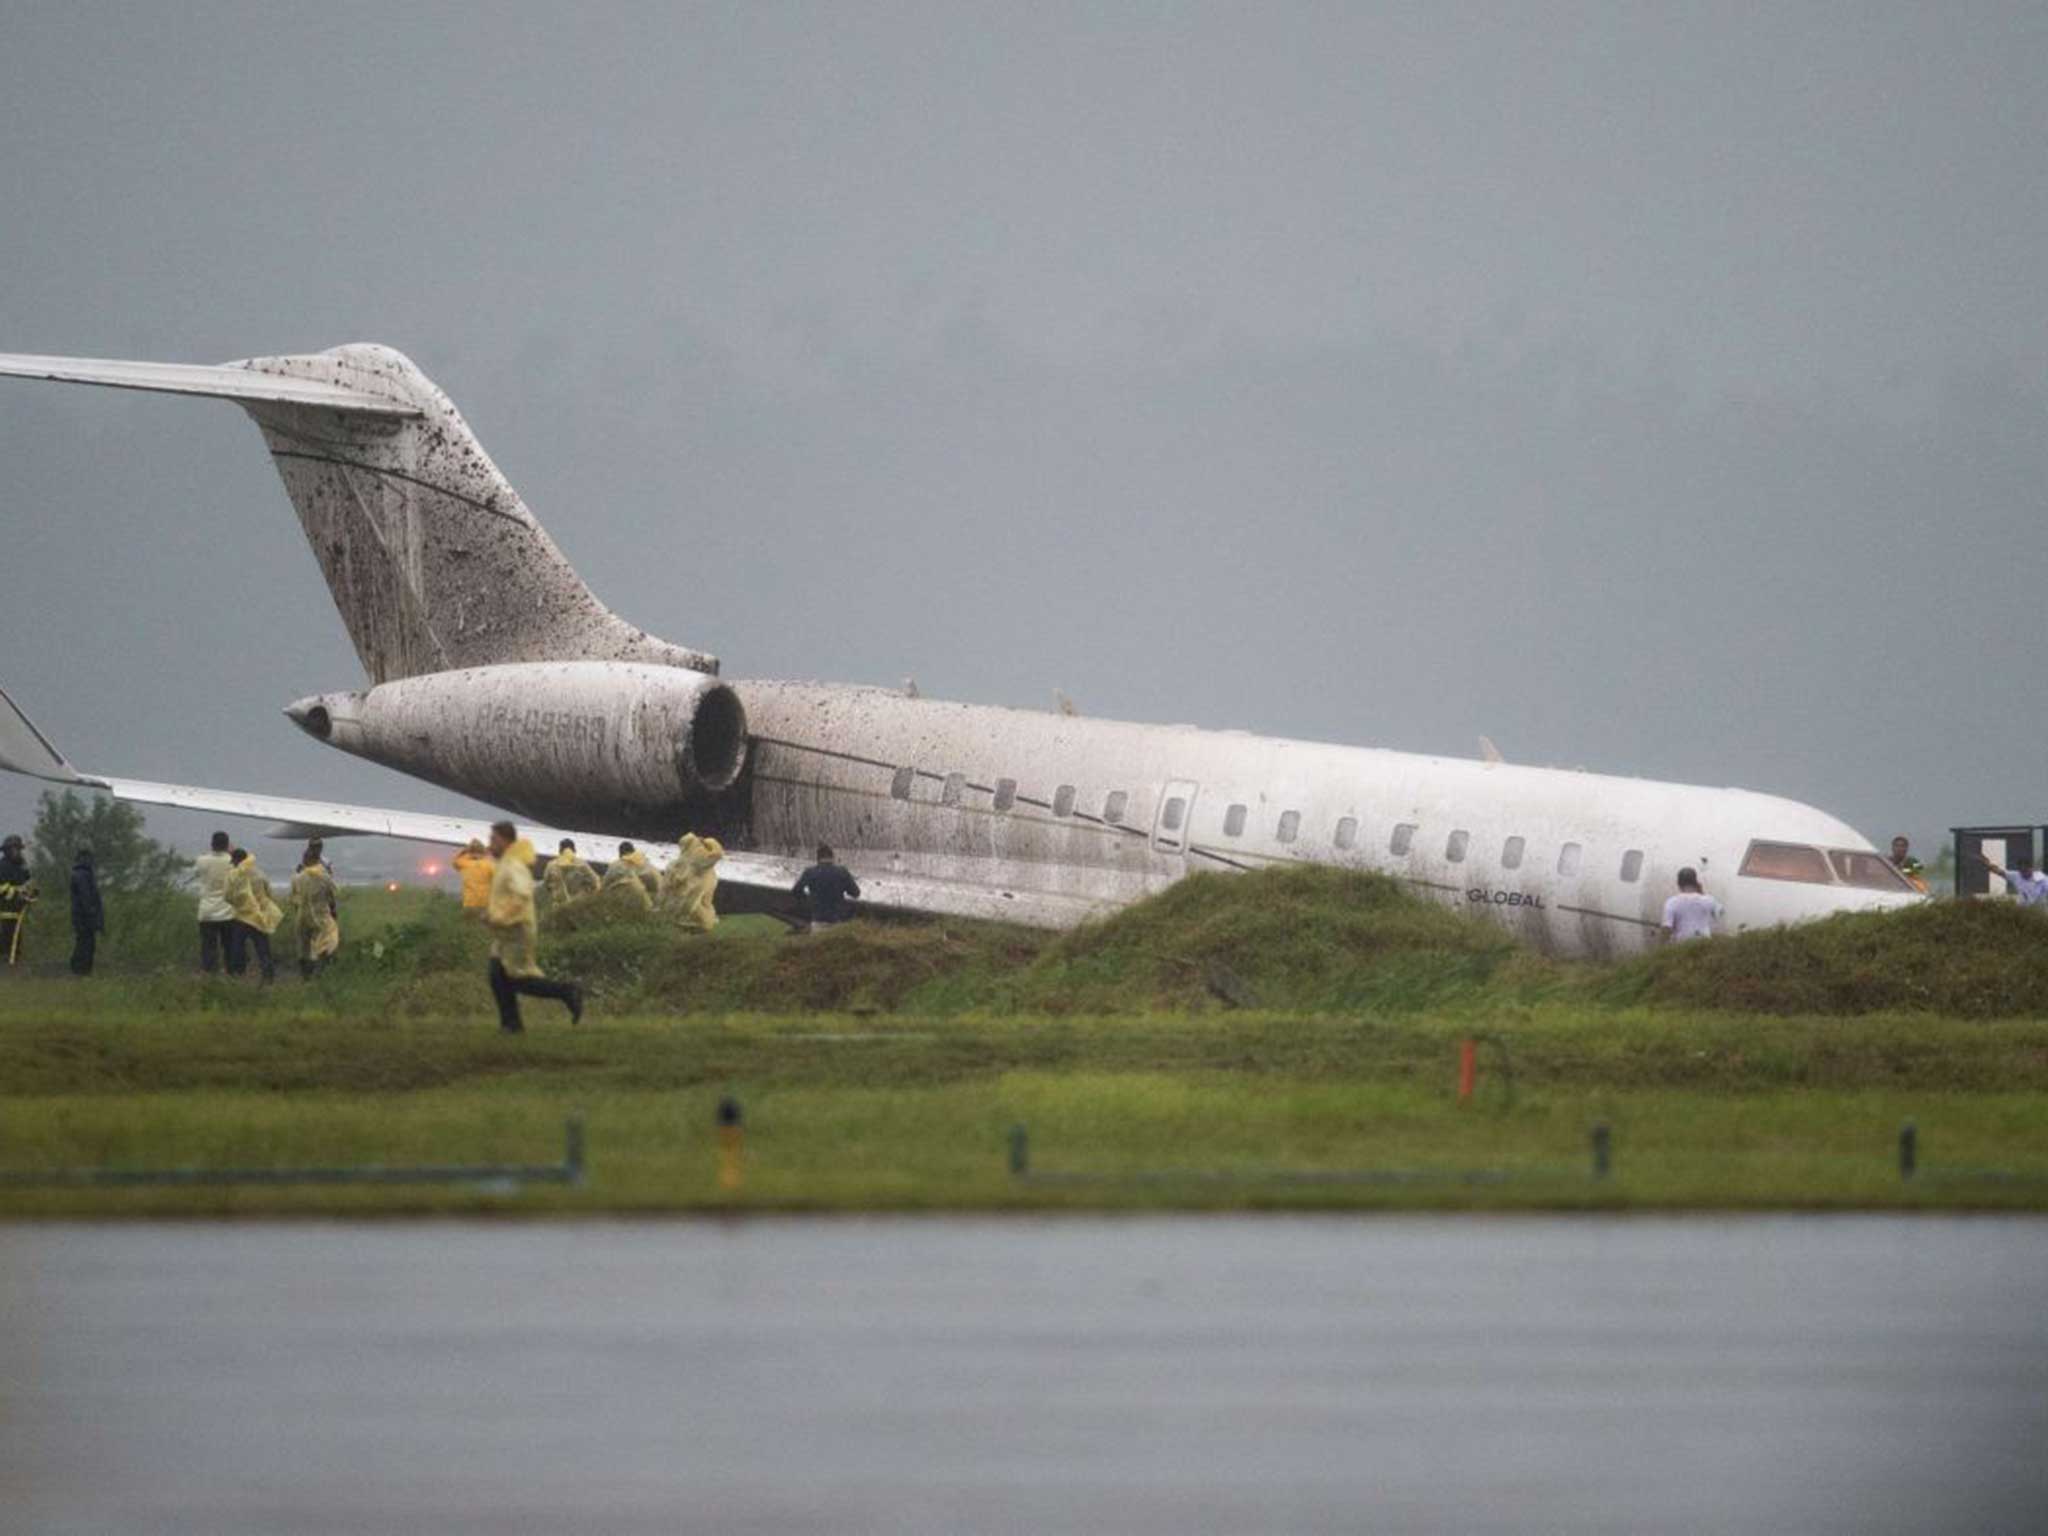 The aircraft veered off the runway after by strong winds from tropical storm Mekkhala